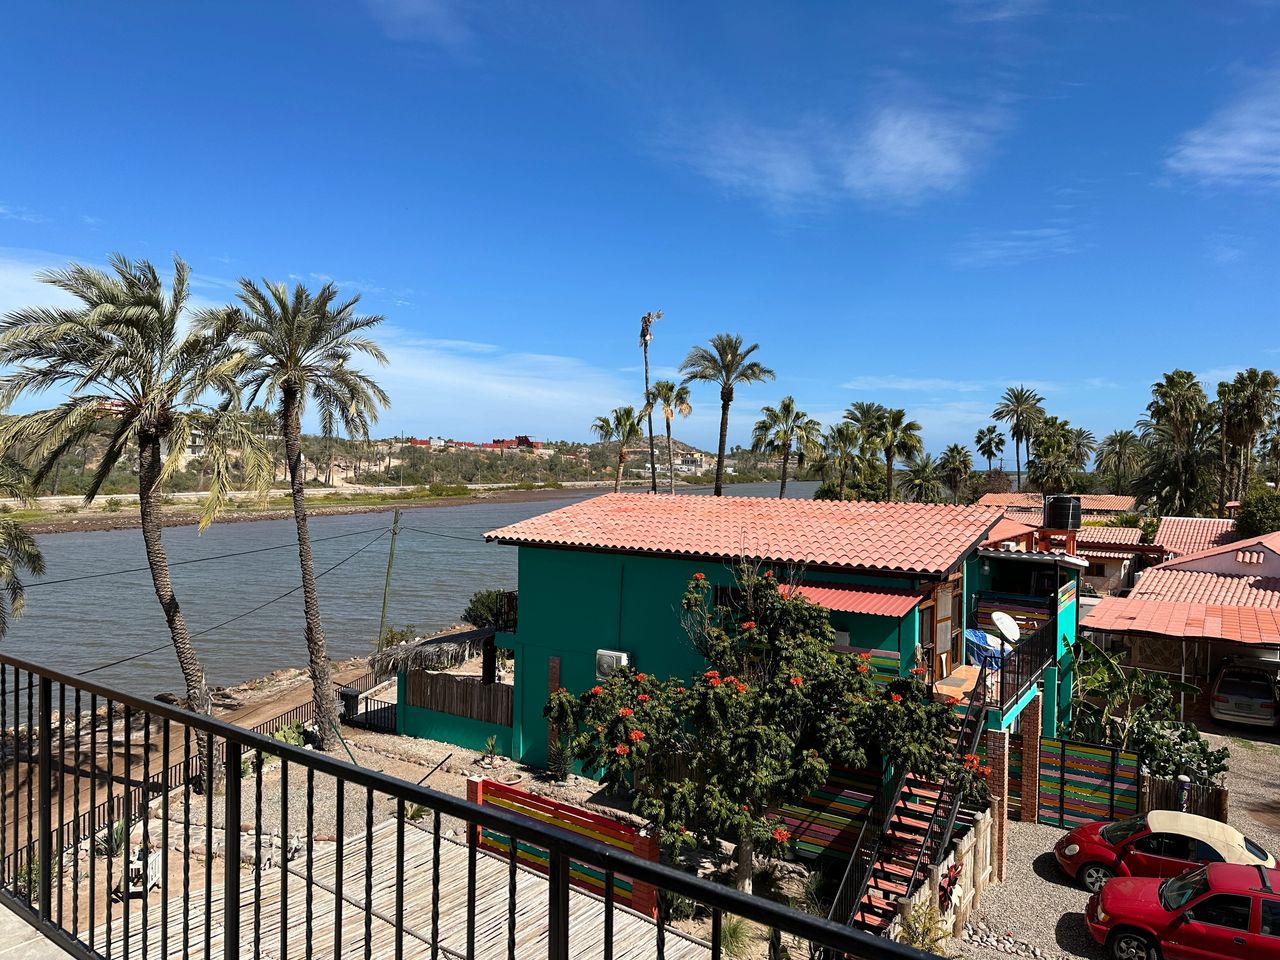 View of the river from our accomodations in Mulege.